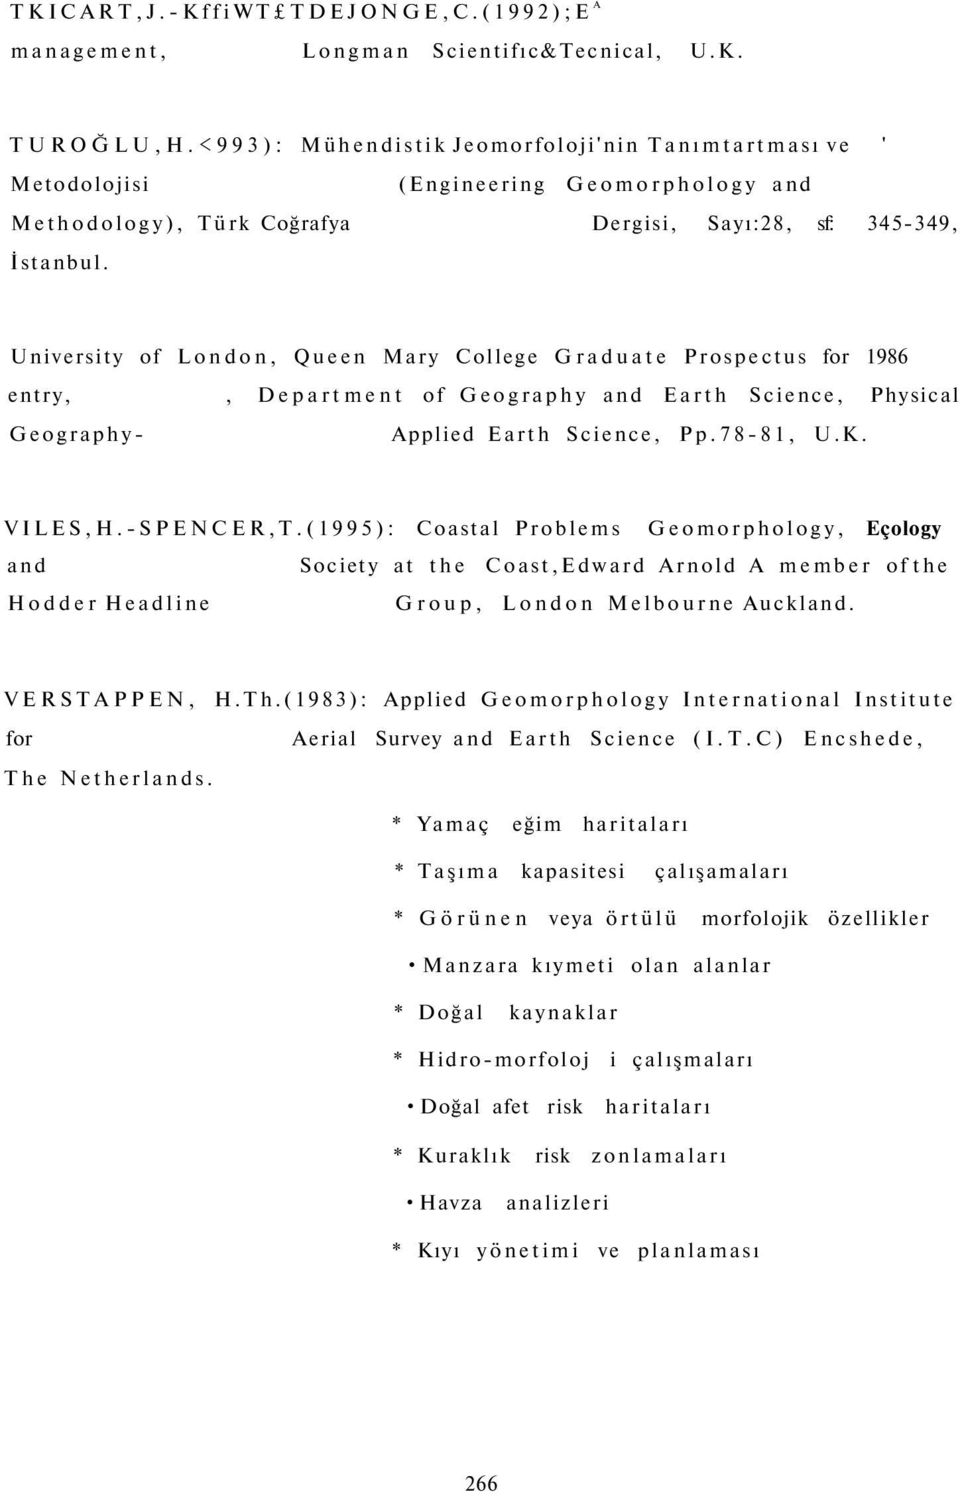 University of London, Queen Mary College Graduate Prospectus for 1986 entry,, Department of Geography and Earth Science, Physical Geography- Applied Earth Science, Pp.78-81, U.K. VILES,H.-SPENCER,T.